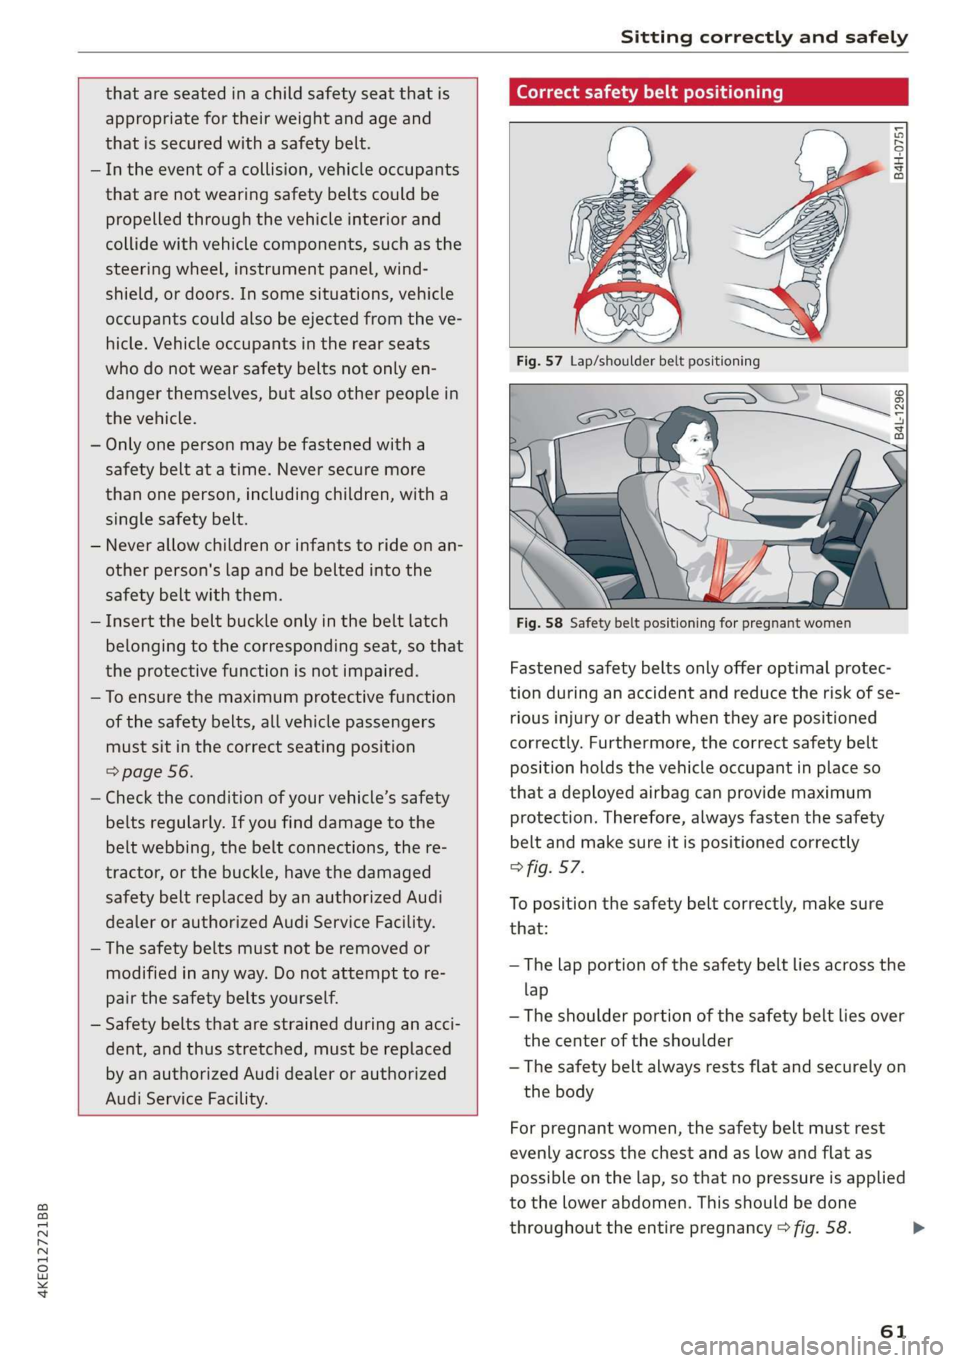 AUDI E-TRON 2019  Owners Manual 4KE012721BB 
Sitting correctly and safely 
  
  
  
that are seated in a child safety seat that is 
appropriate for their weight and age and 
that is secured with a safety belt. 
In the event of a col